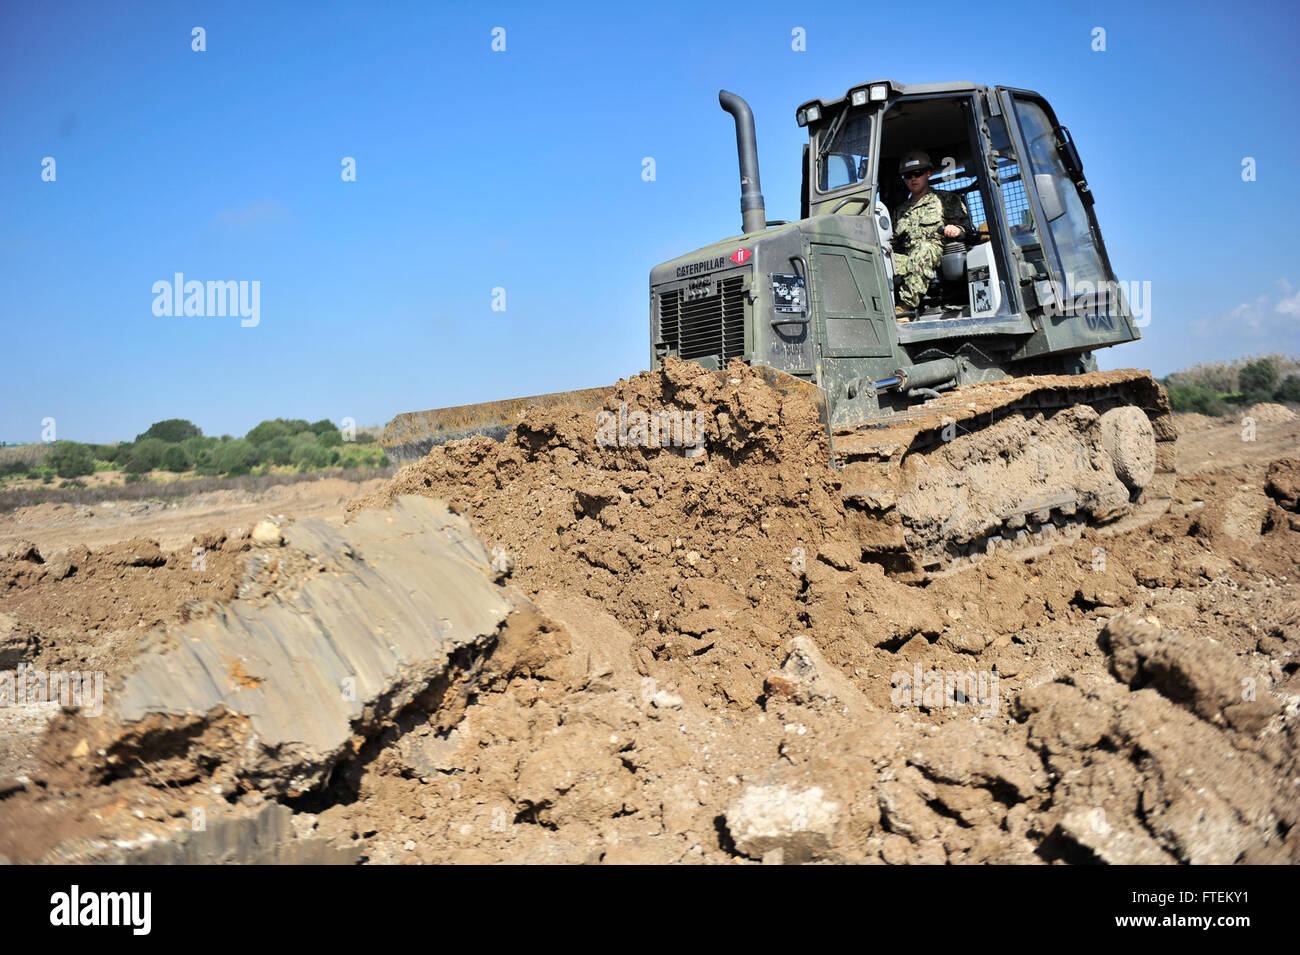 NAVAL STATION ROTA, Spain (Feb. 13, 2015) Equipment Operator 3rd Class David Mortensen, assigned to Naval Mobile Construction Battalion (NMCB) 11, operates a bulldozer to level the area where a Helicopter Landing Zone (HLZ) will be placed Feb. 13, 2015. The HLZ project, once finished, will assist in the bilateral training with the Spanish military, Explosive Ordnance Disposal and will not interfere with the main airstrip of Naval Station Rota. (U.S. Navy photo by Mass Communication Specialist 1st Class Michael C. Barton/Released) Stock Photo